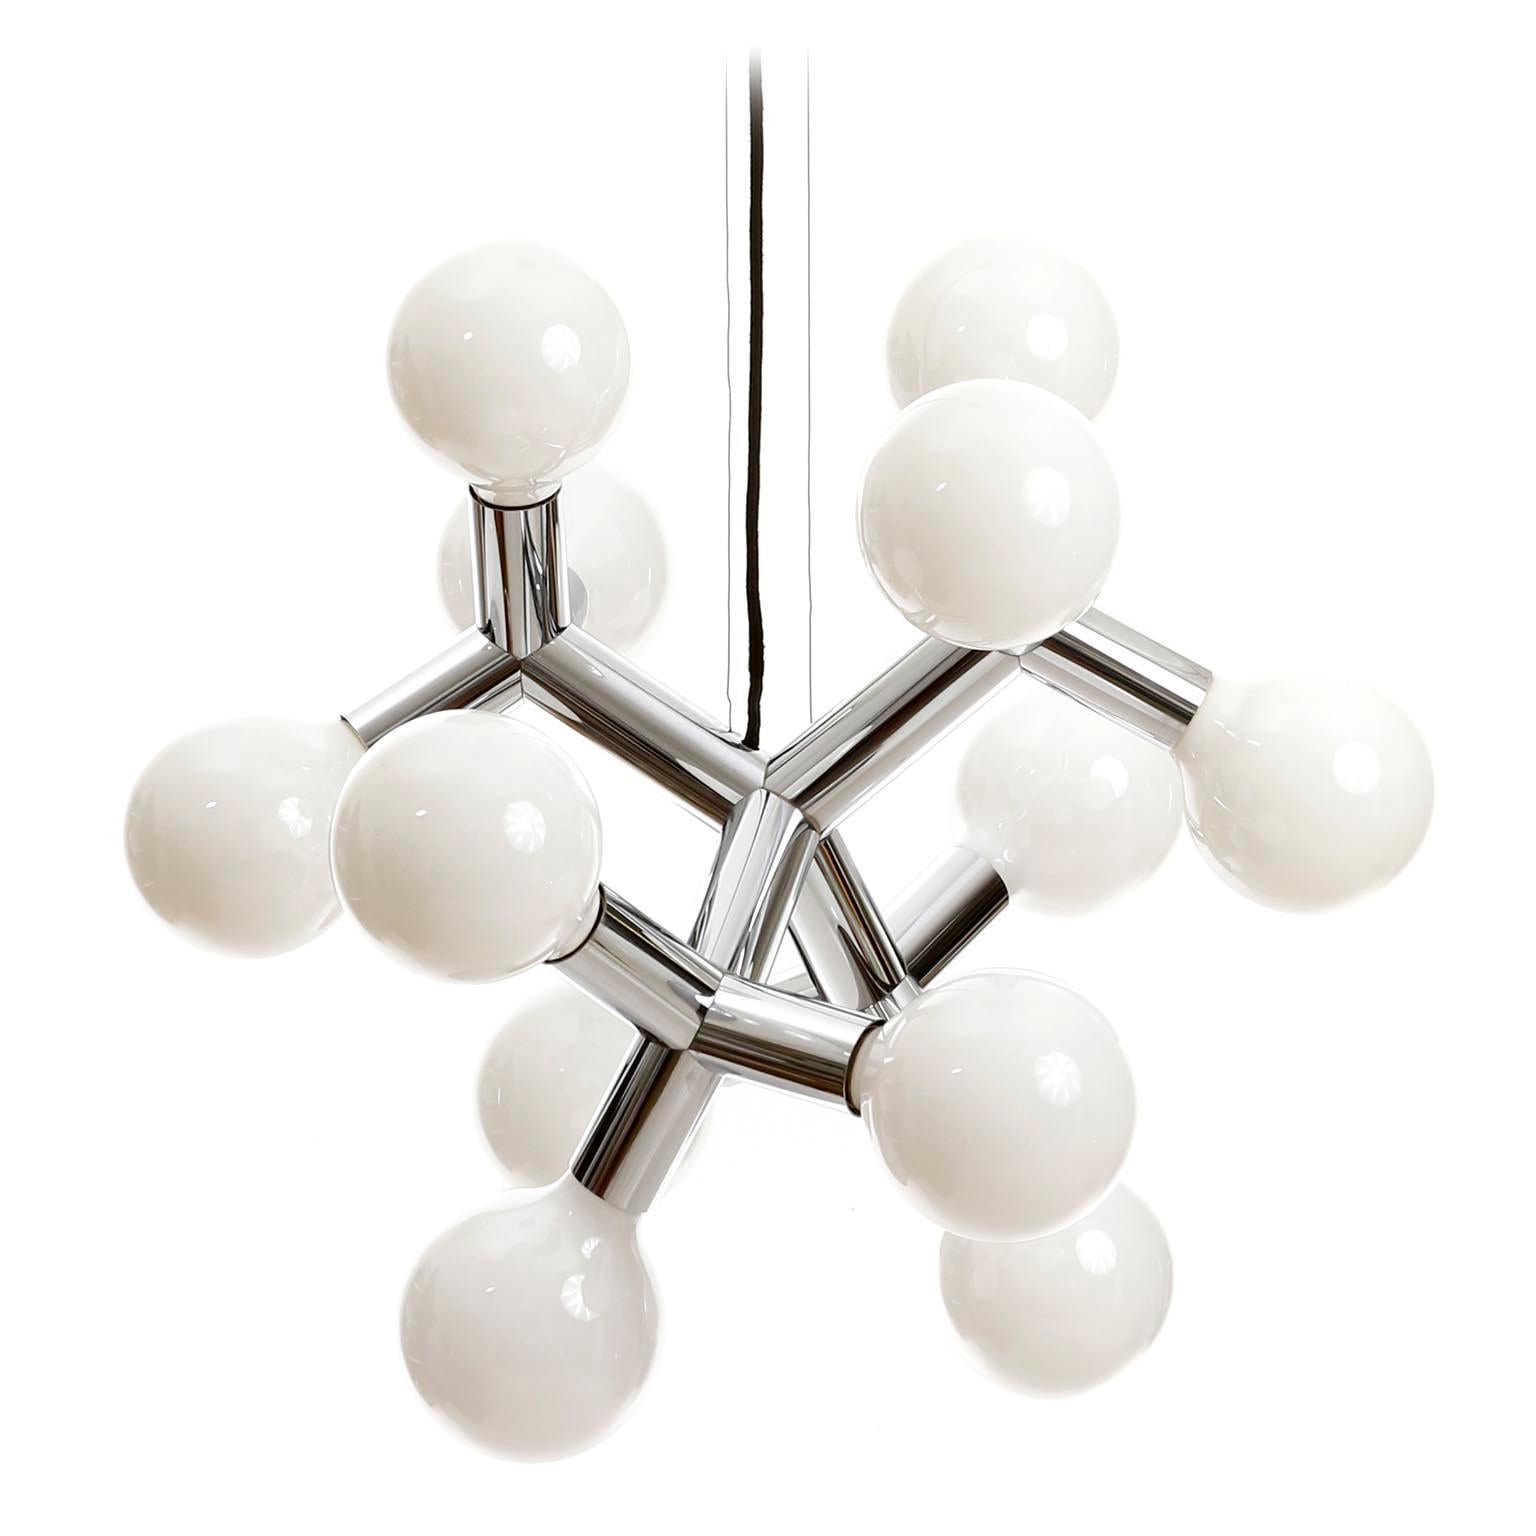 Mid-Century Modern Atomic Pendant Light Chandelier by Kalmar, Polished Chrome, 1970s, One of Four For Sale